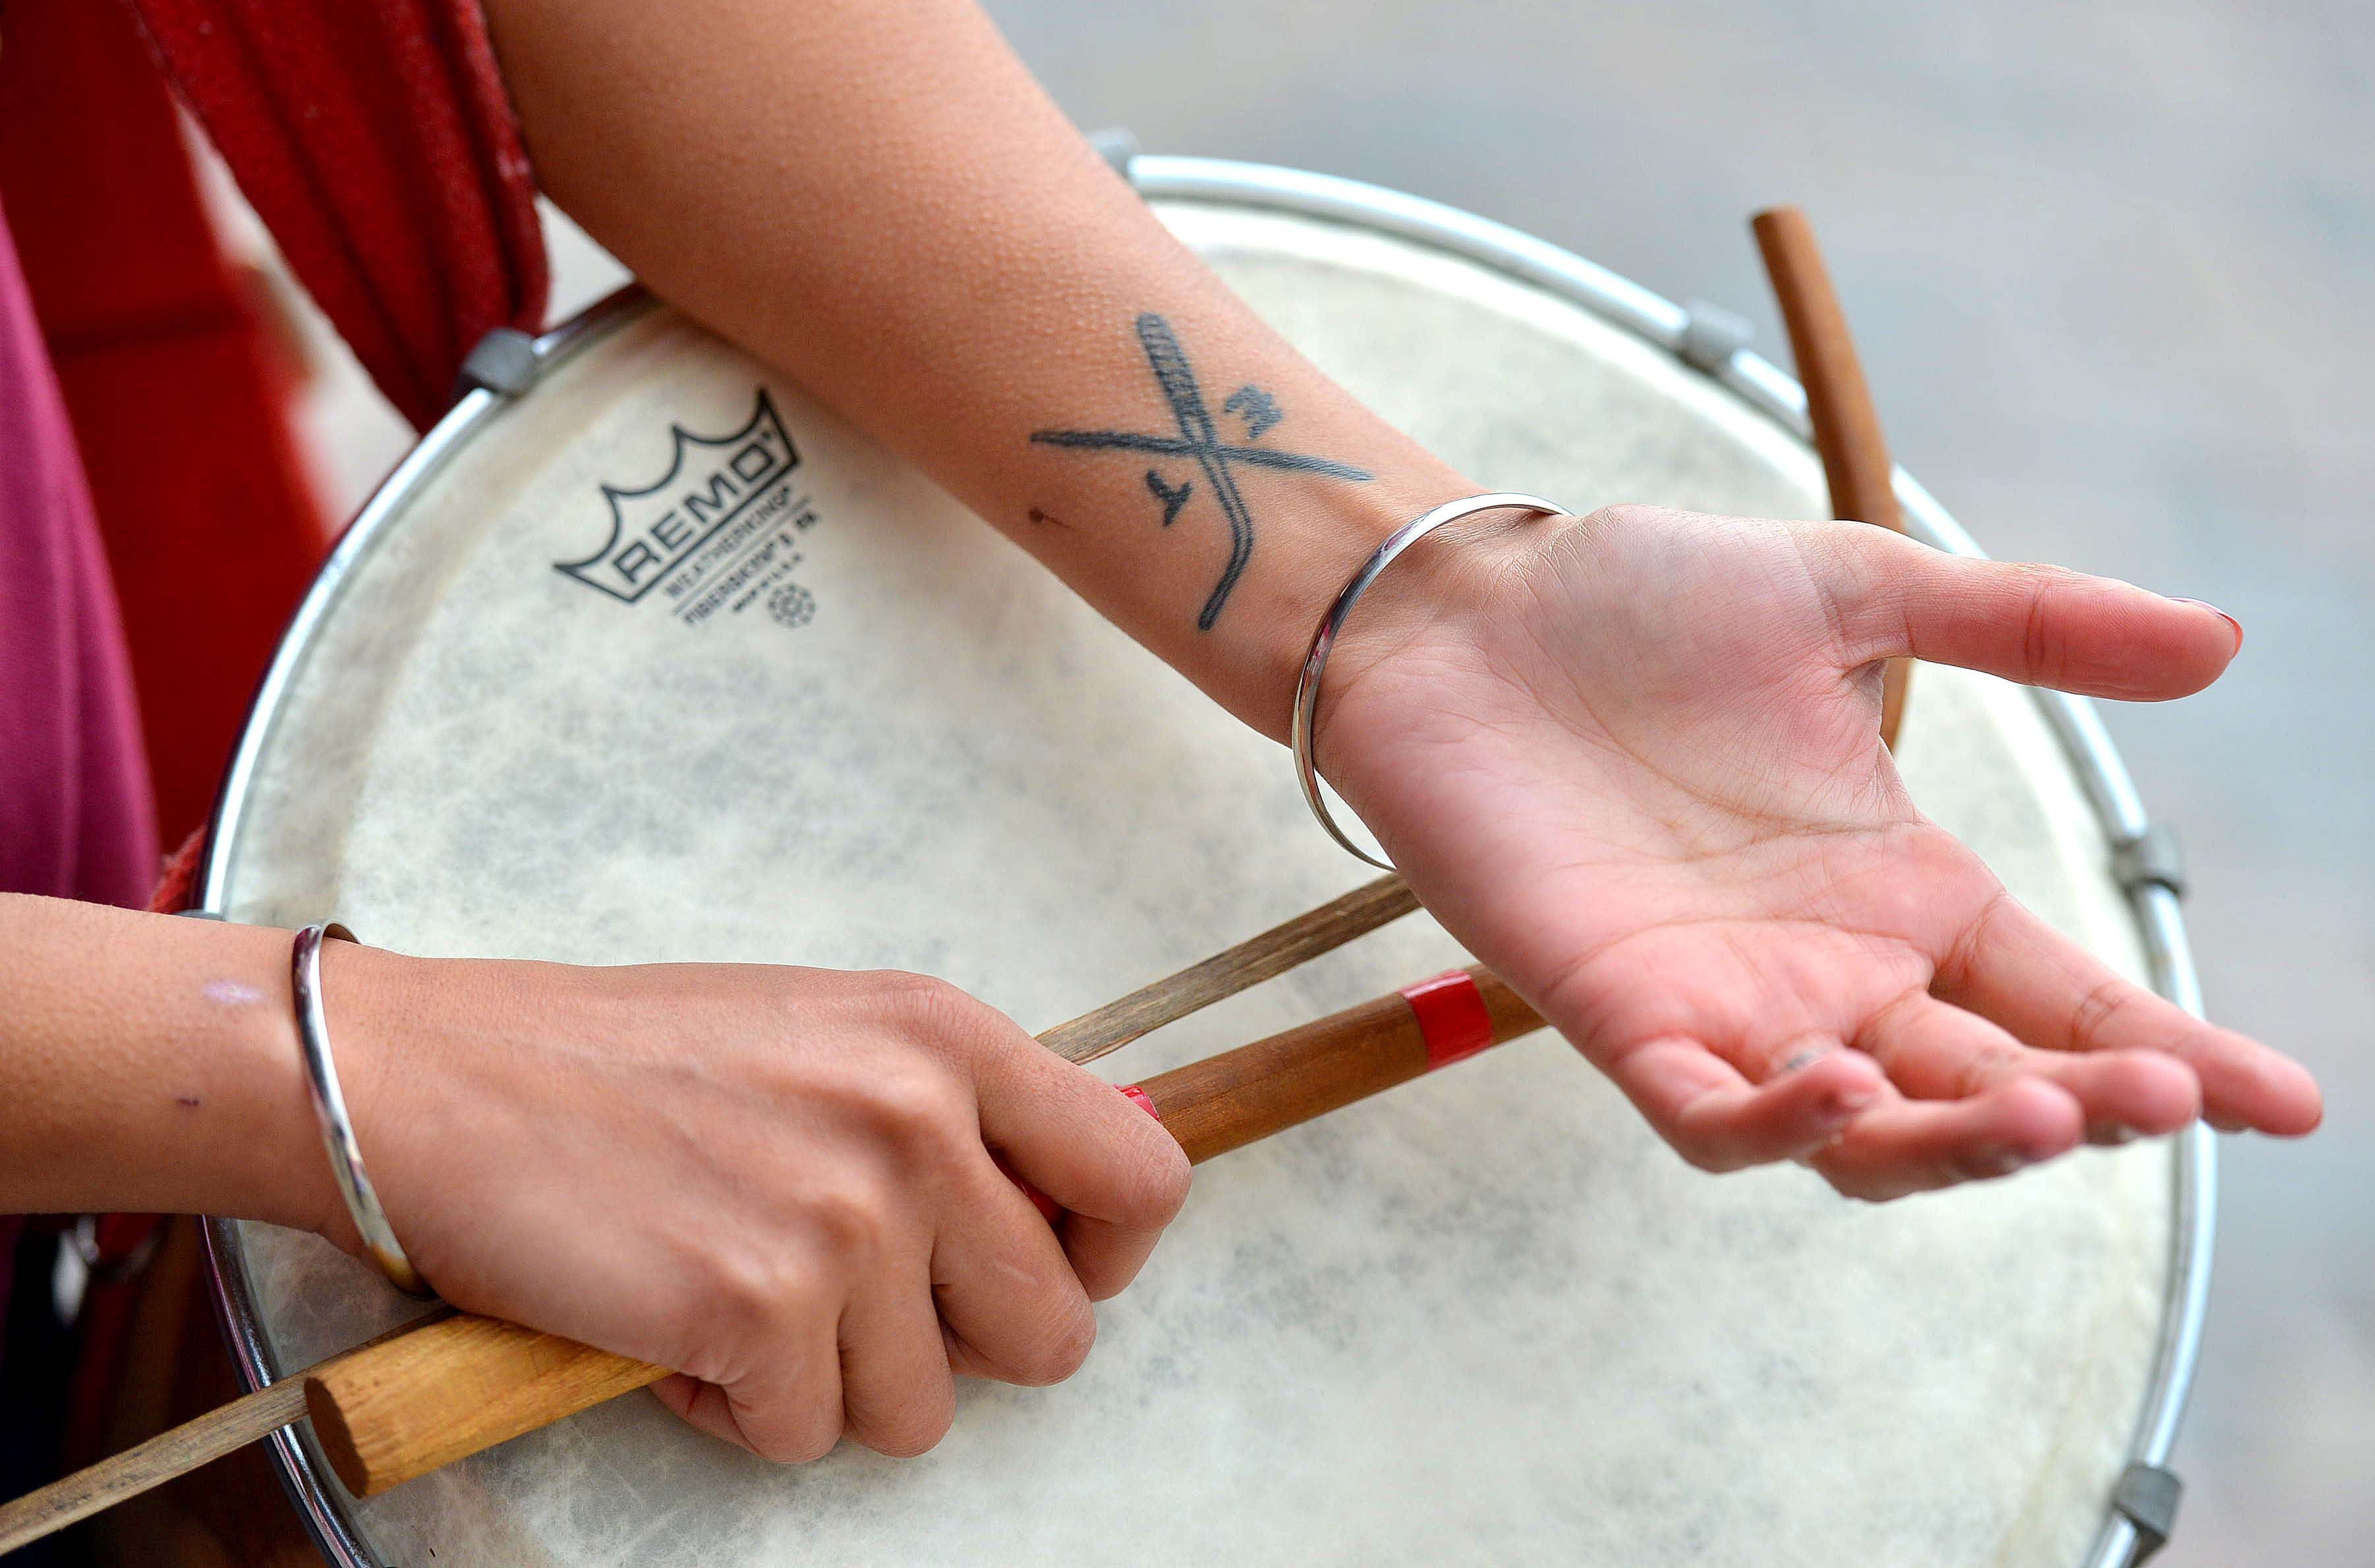 Top 67 Drum Tattoo Ideas 2021 Inspiration Guide